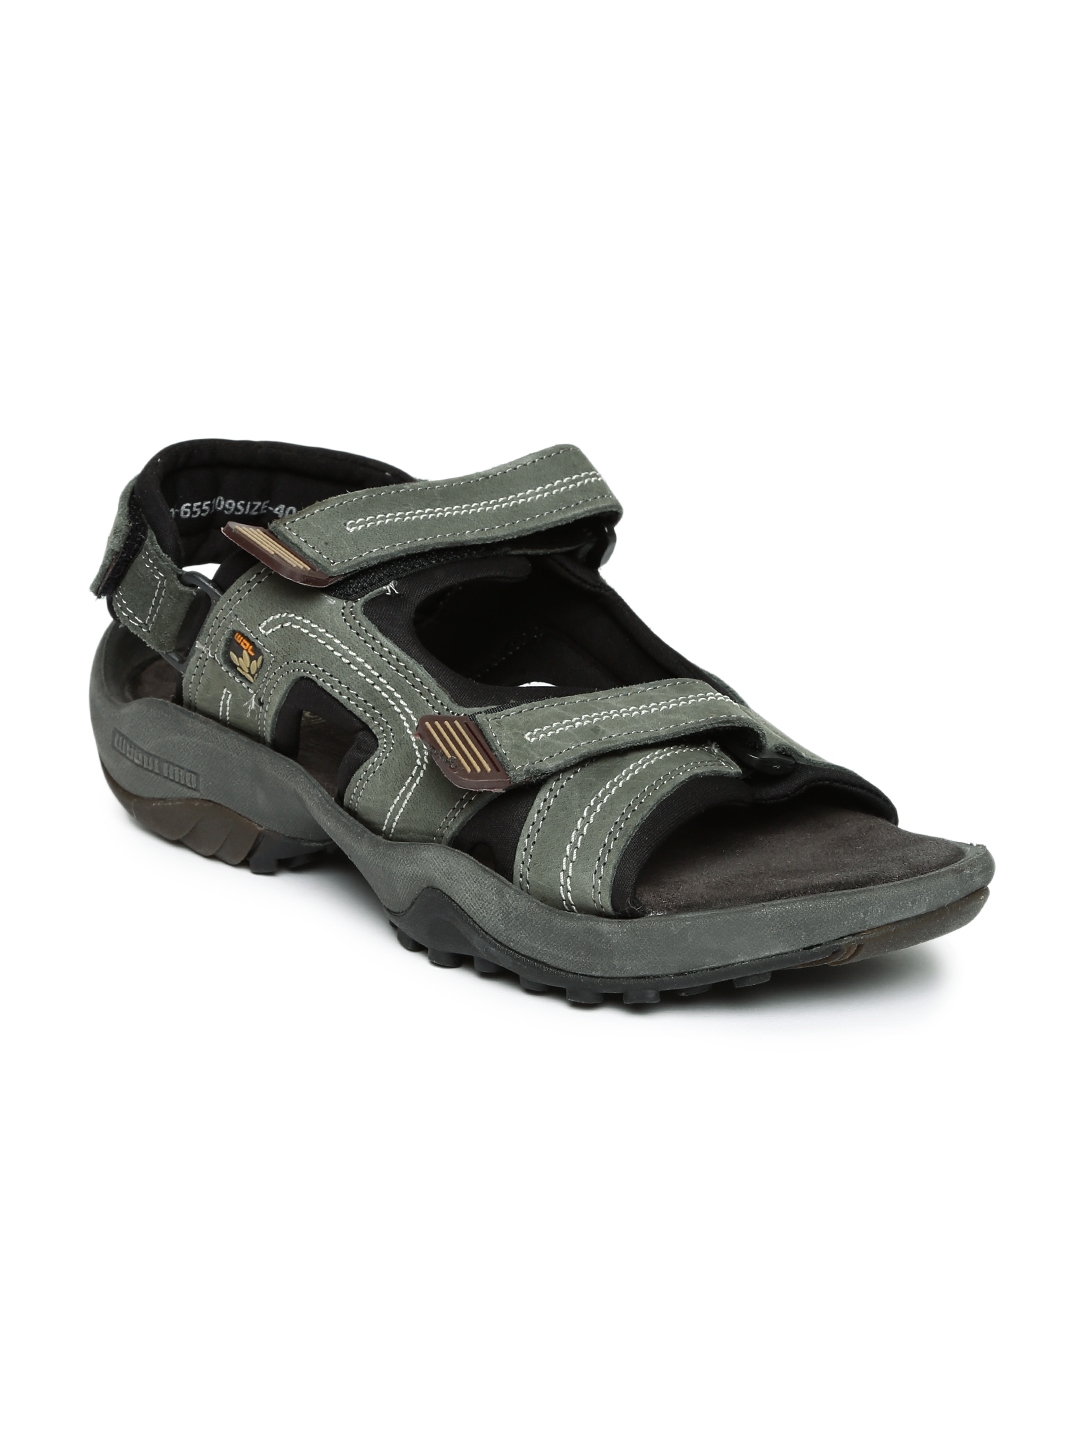 Woodland OLIVE GREEN SANDAL FOR MEN in Belgaum at best price by American  Shoes  Justdial